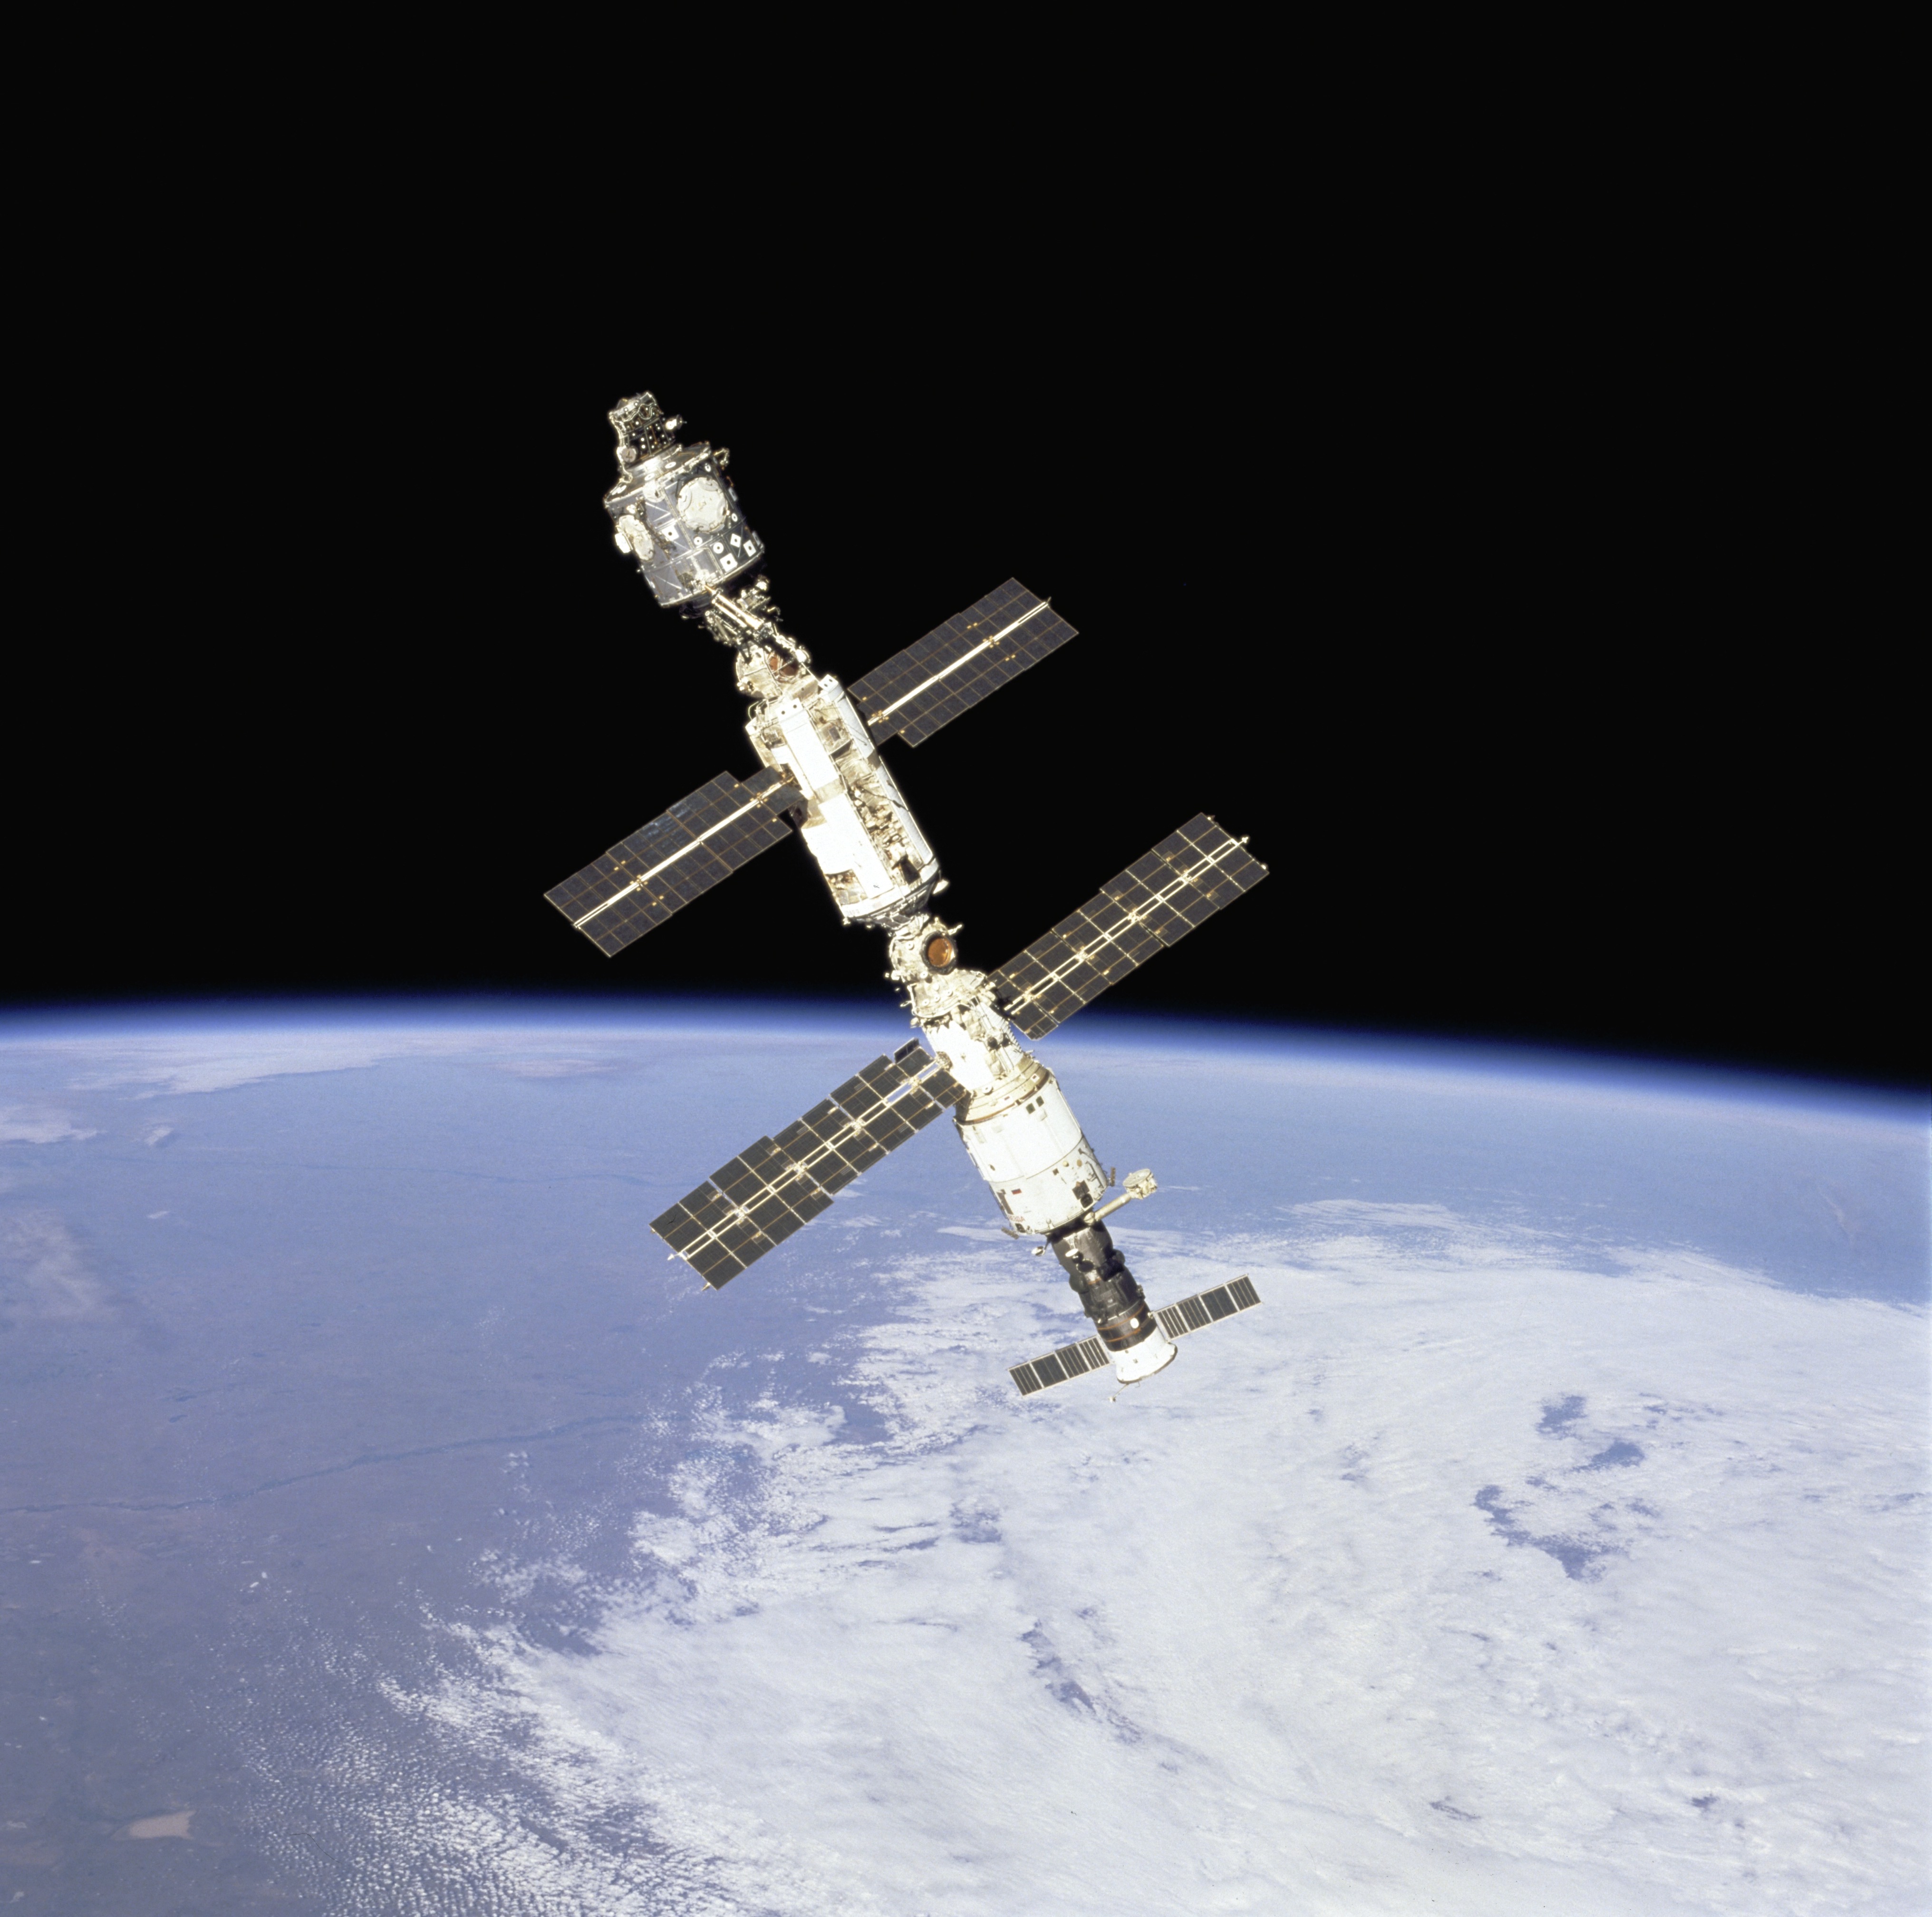 Iss aktuelle position